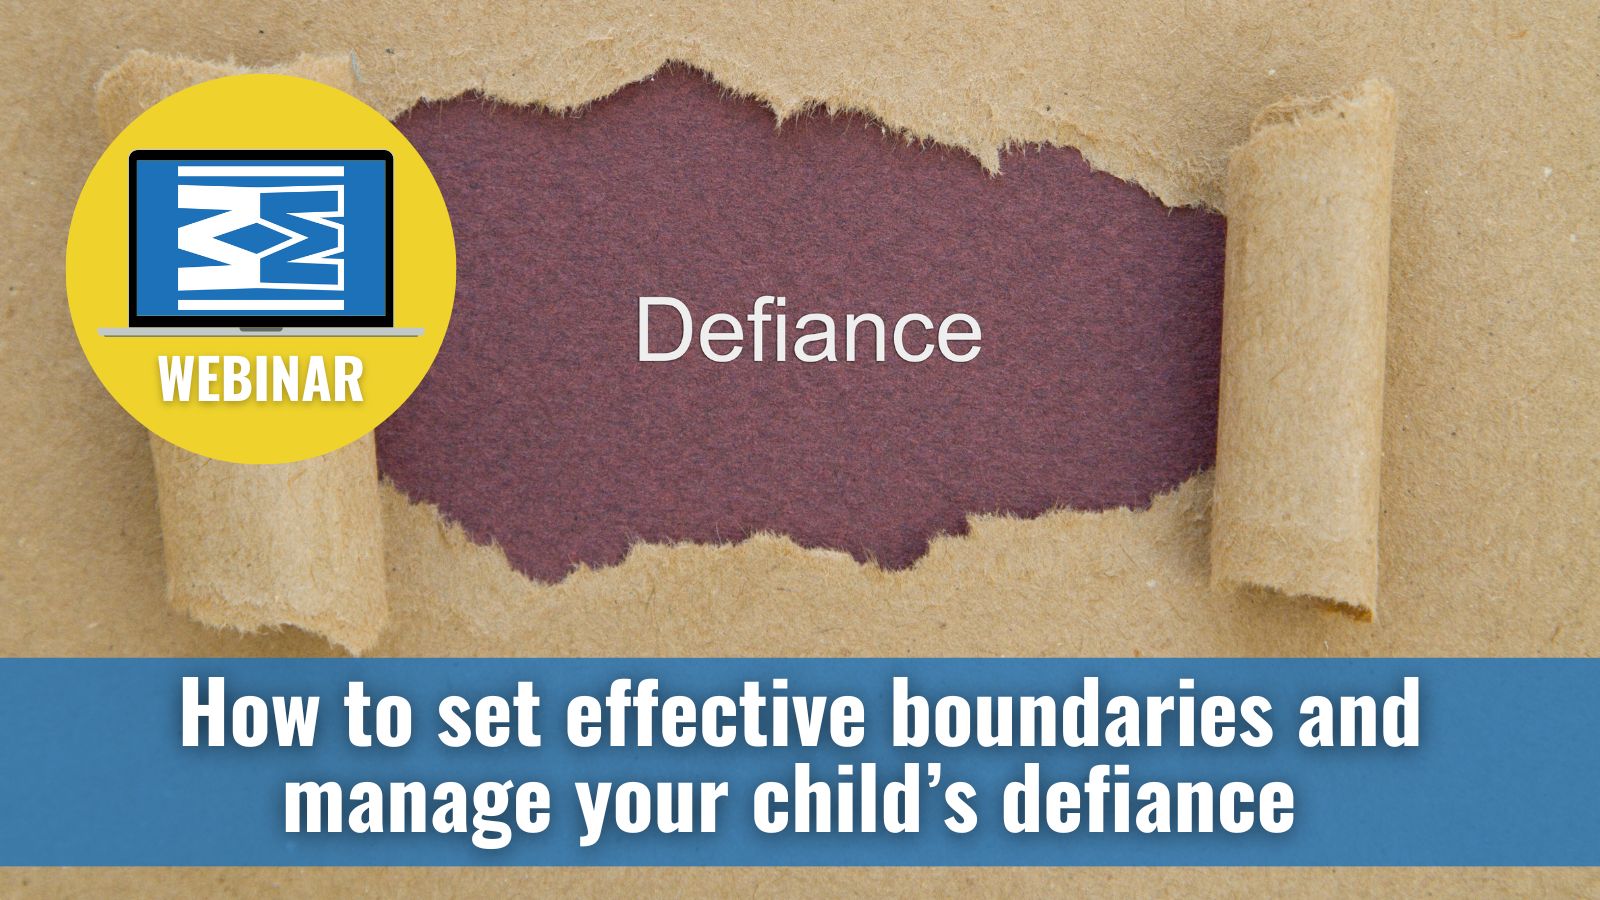 DEFIANCE WEBINAR- How to set effective boundaries and manage your child’s defiance